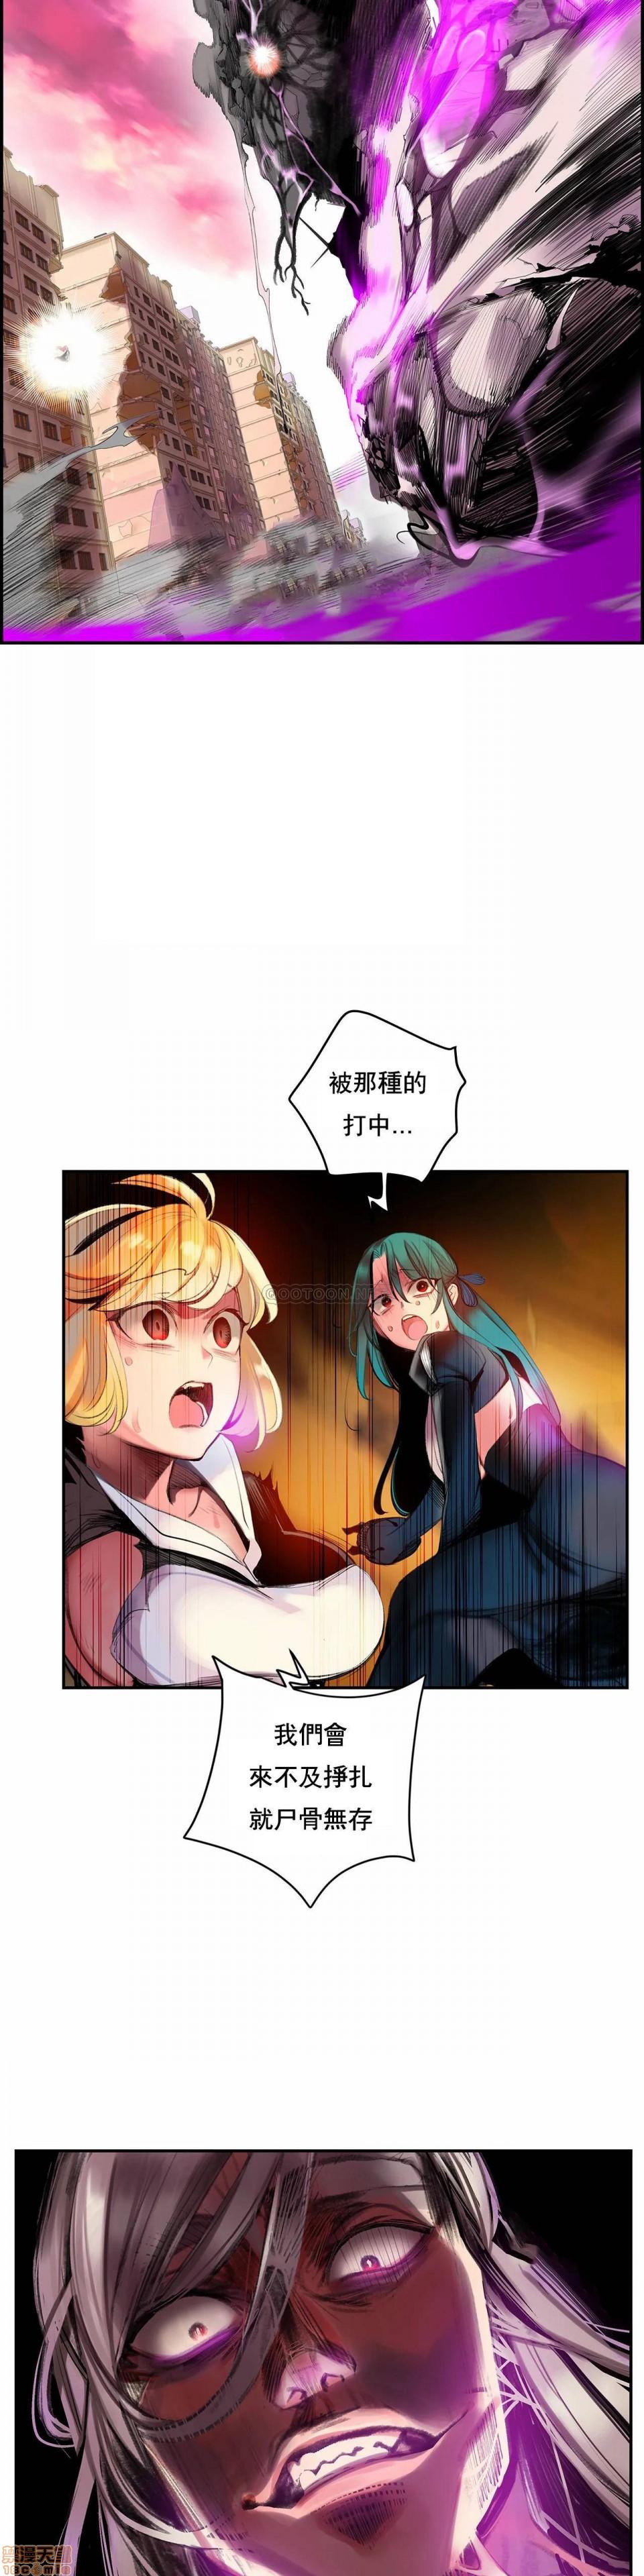 [Juder] Lilith`s Cord (第二季) Ch.77-93 end [Chinese] 125